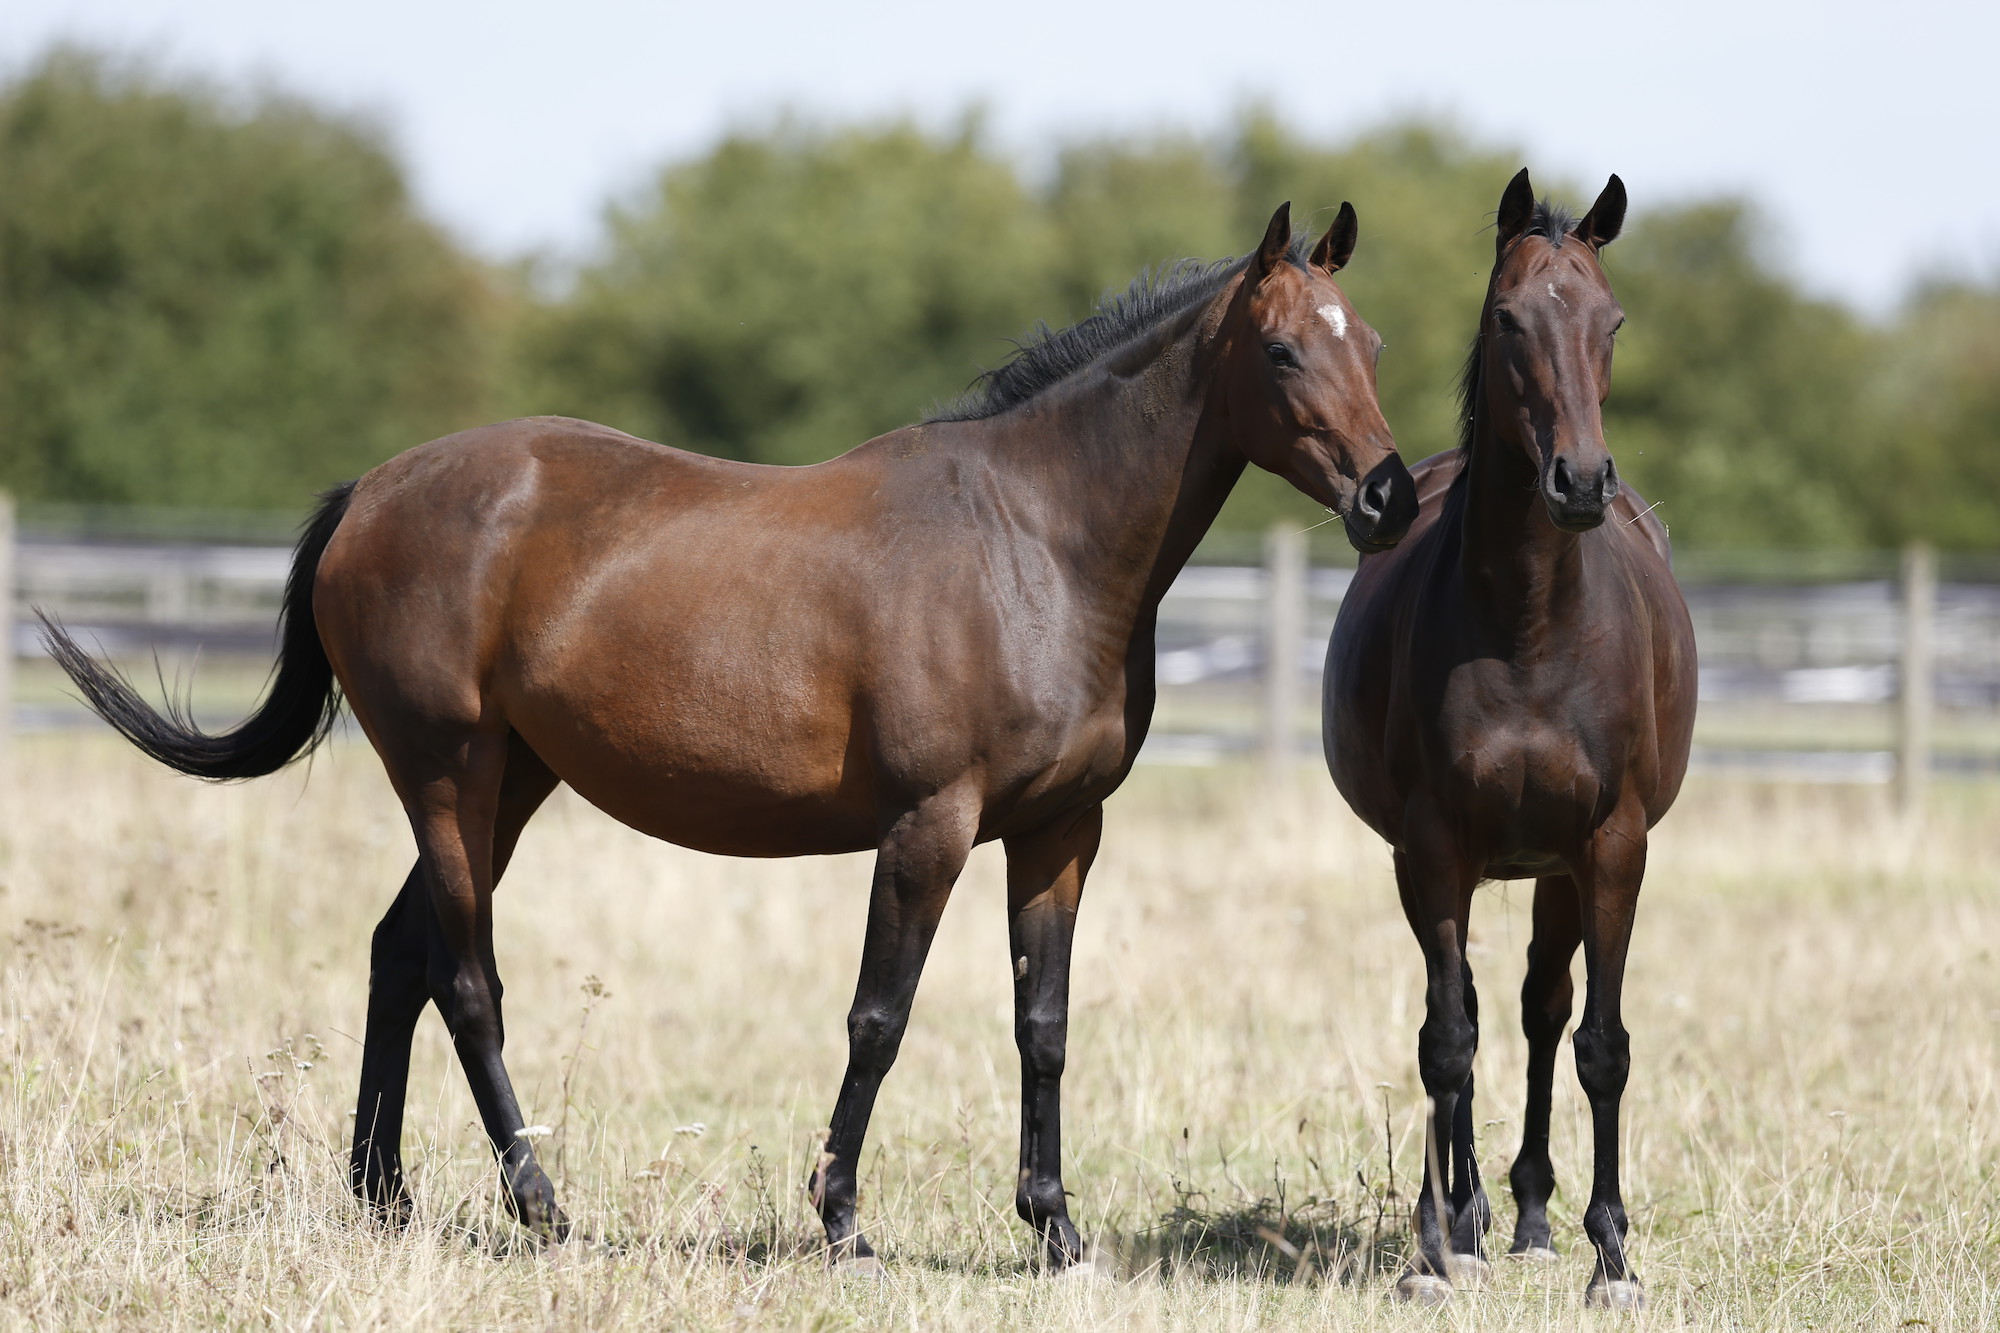 Thoroughbred horses Clover and Heather at Burford rehoming centre